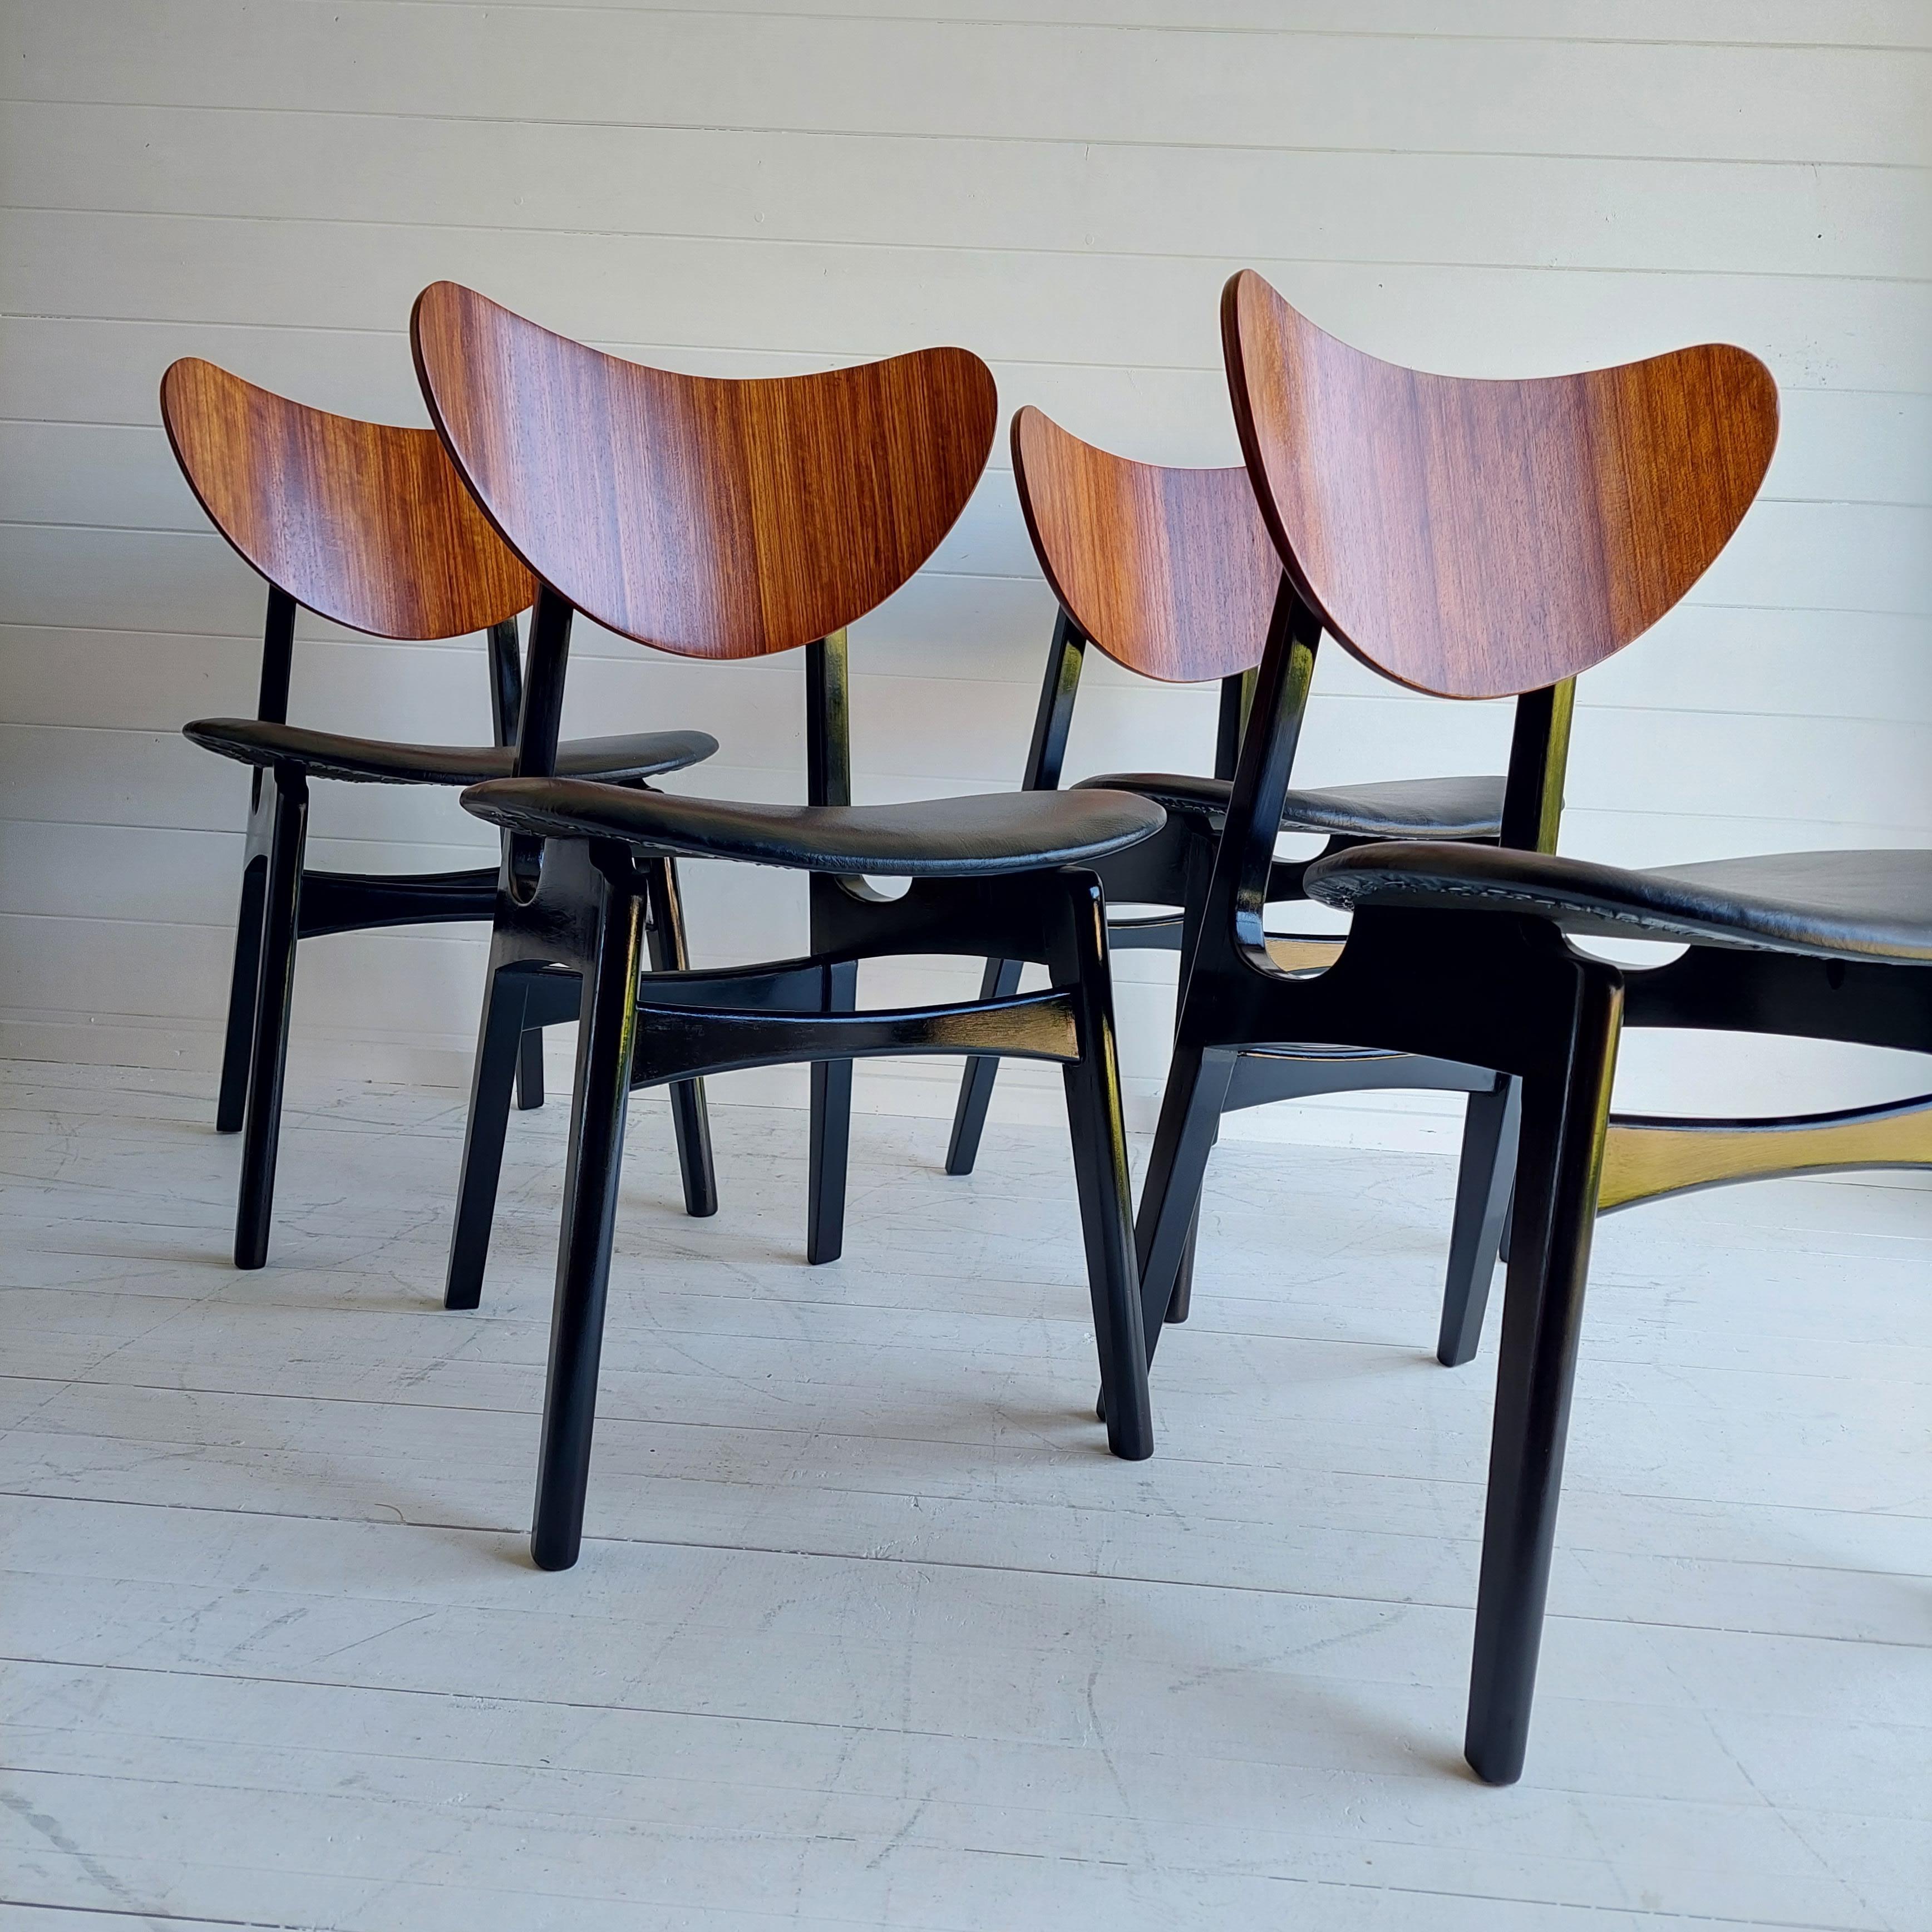 The black lacquered legs and new black vinyl fabric contrast beautifully with the deep warmth of the Tola mahogany backs.
Altogether, it is a set that would make any dining area stand out for its cool and bold style.

Tola and Black was E.